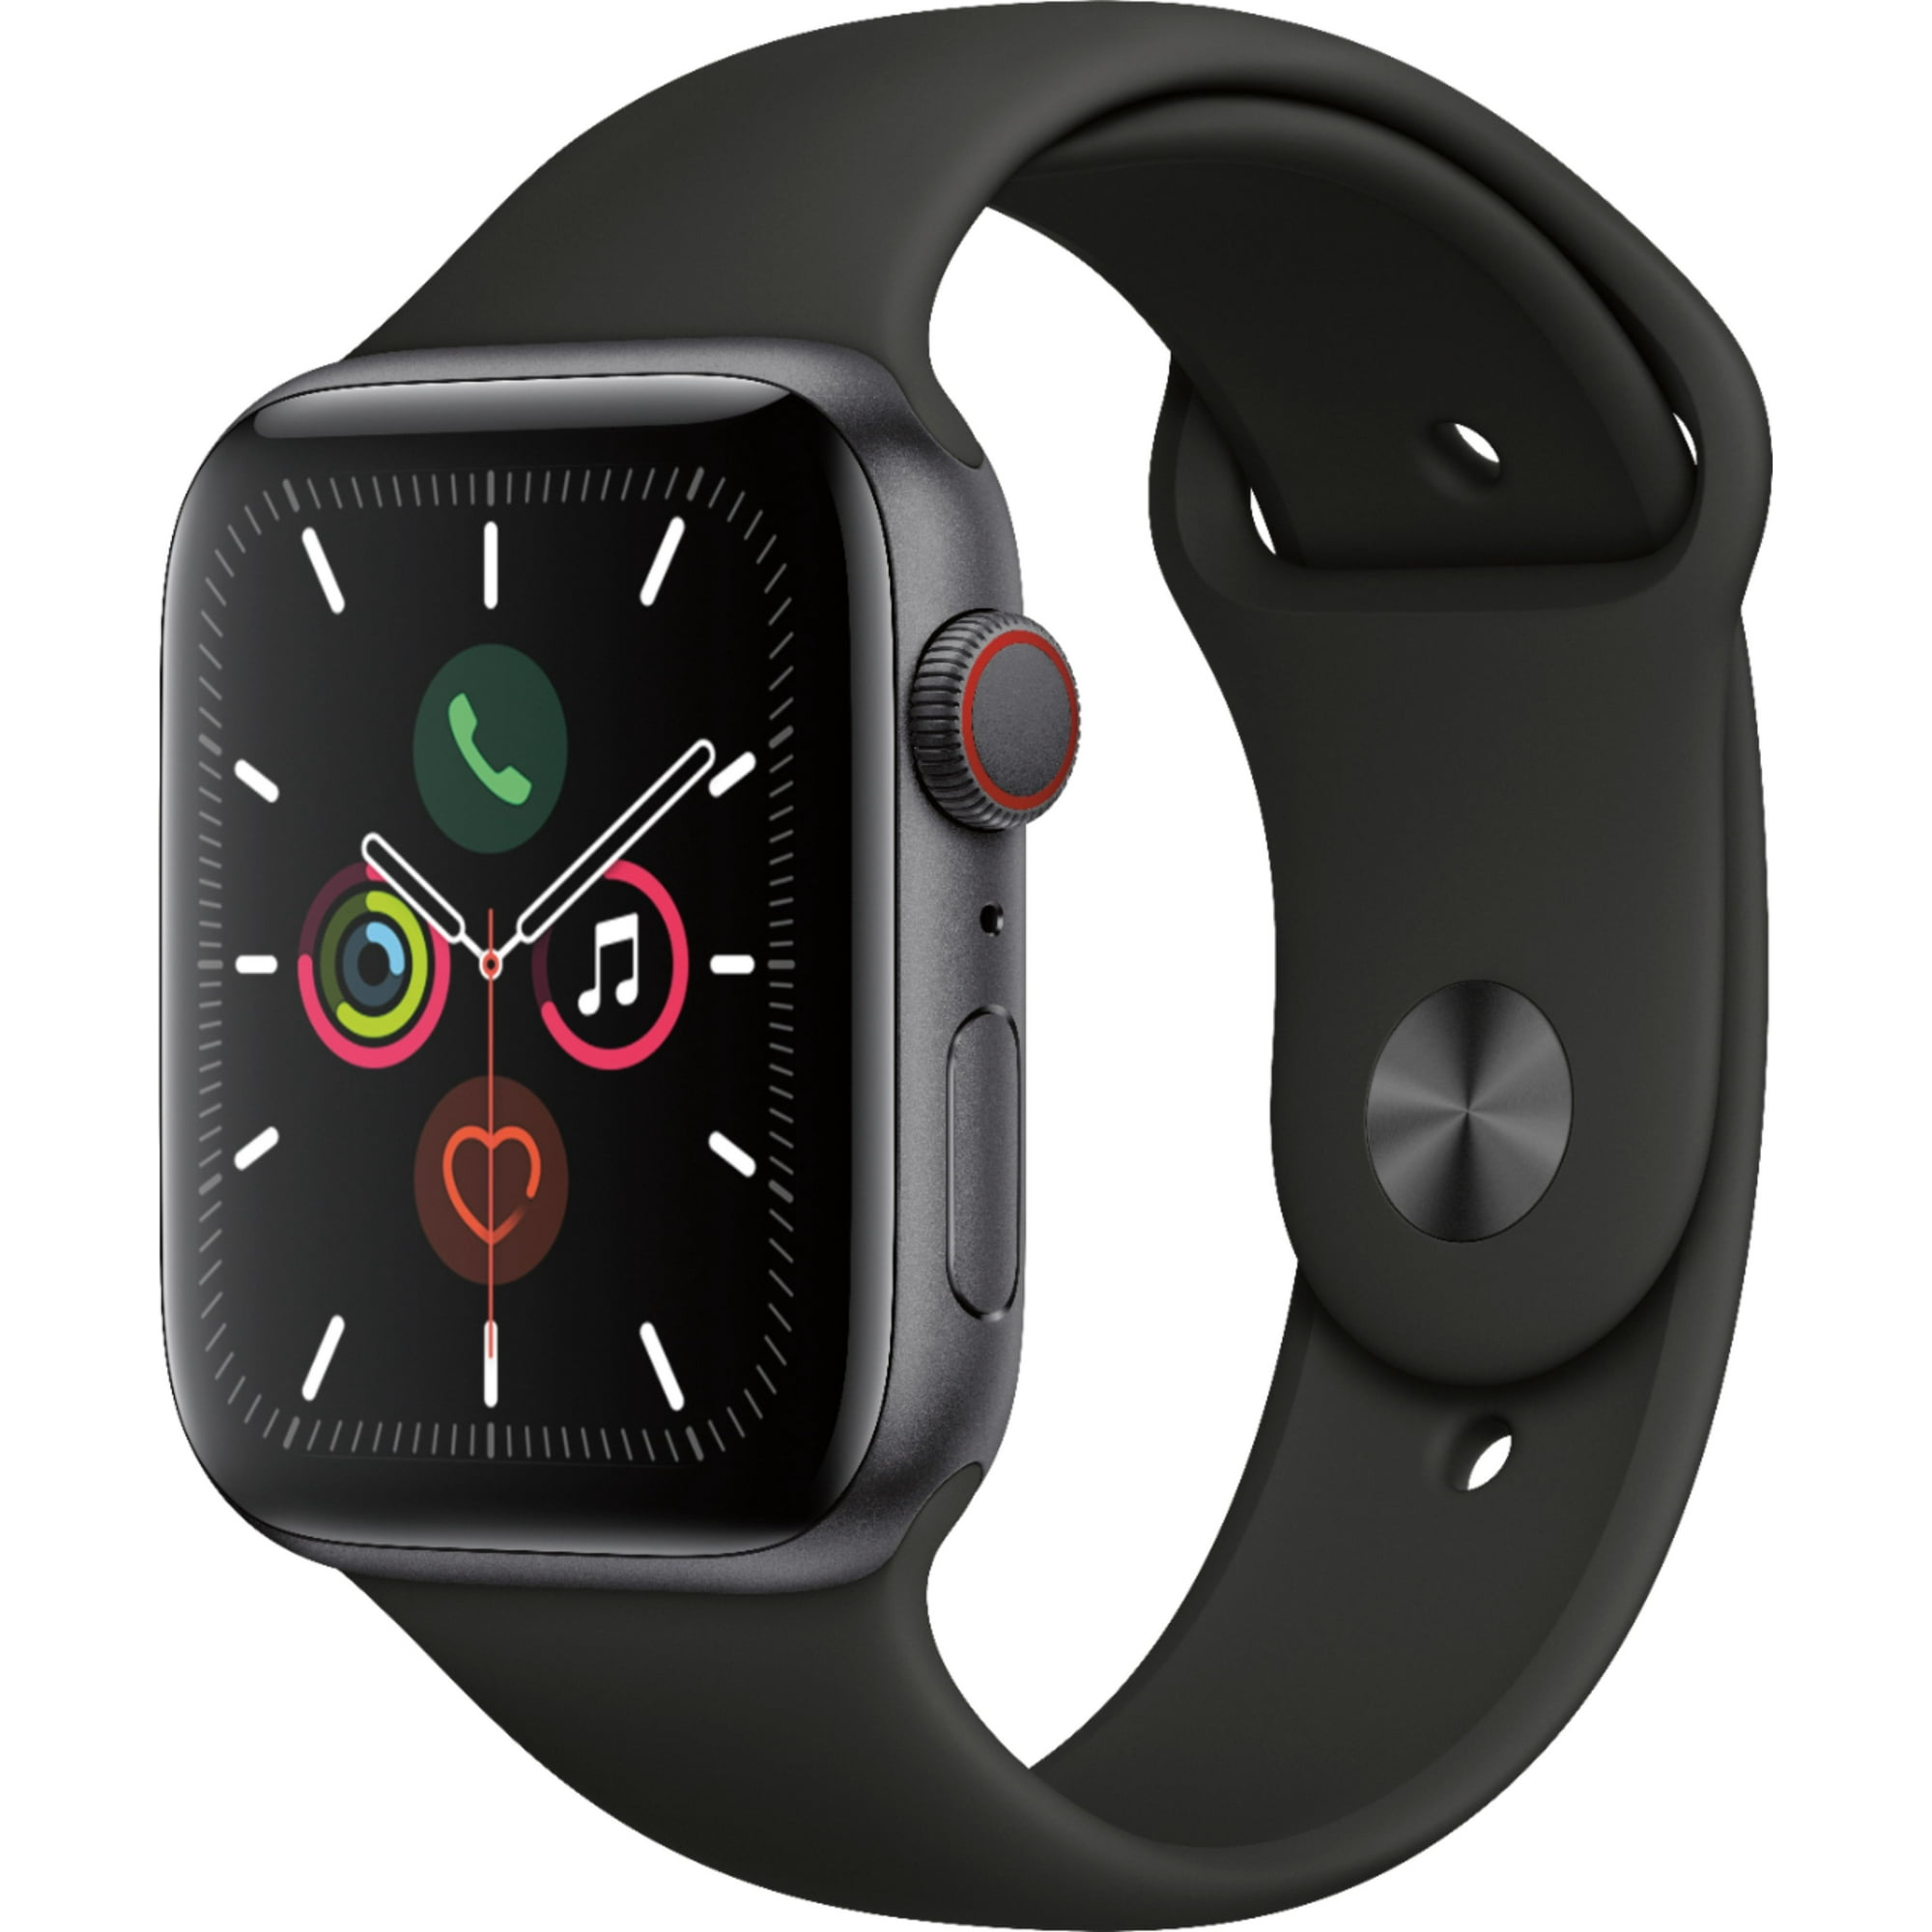 Apple Watch Series 5 (GPS + Cellular, 44mm) - Space Gray Aluminum Case with  Black Sport Band